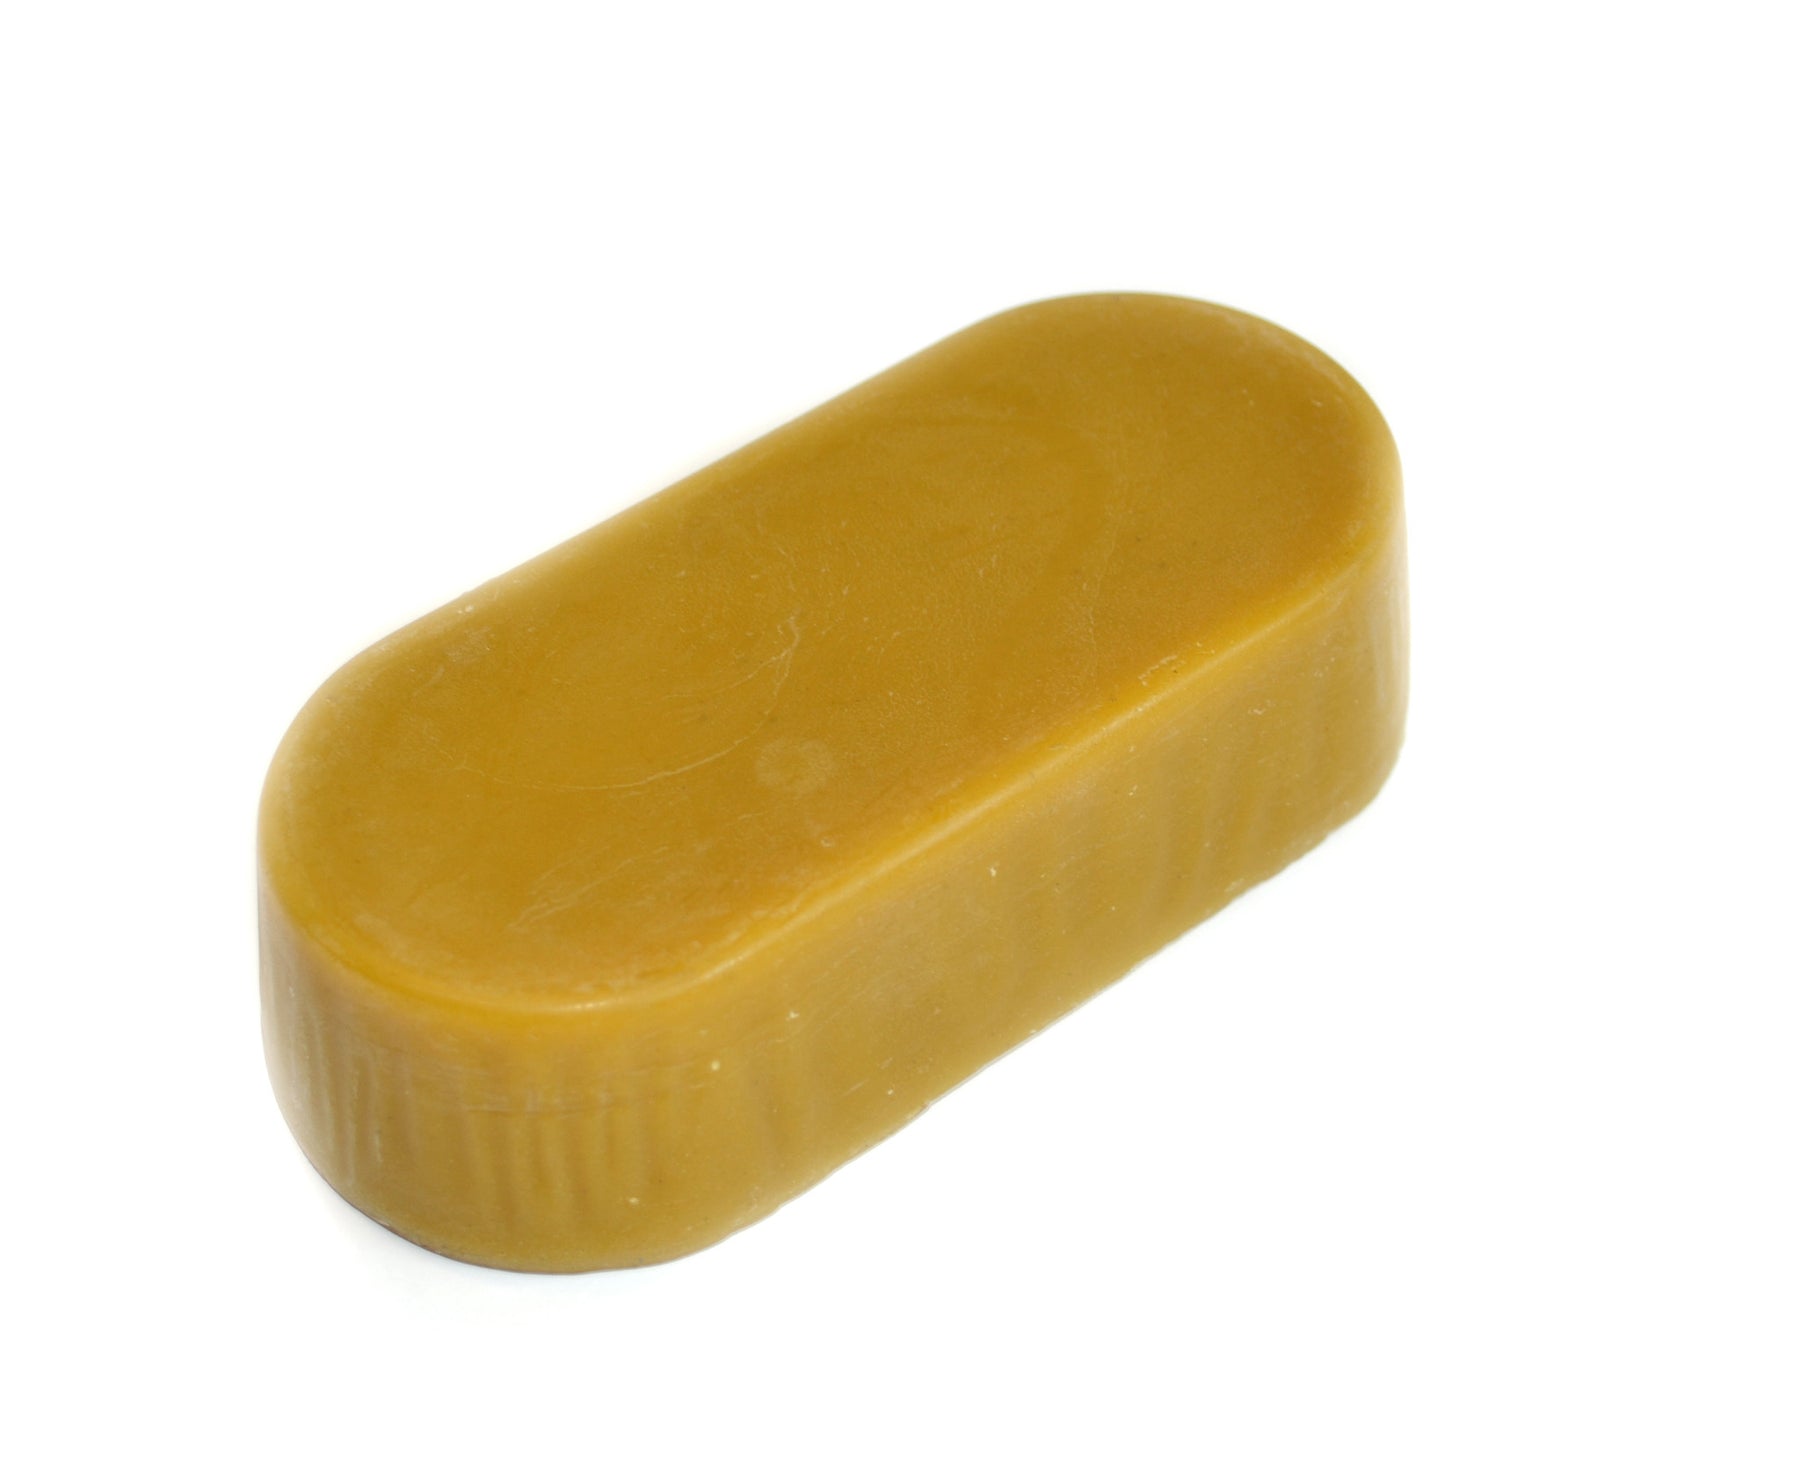 French - Beeswax Block (Large)